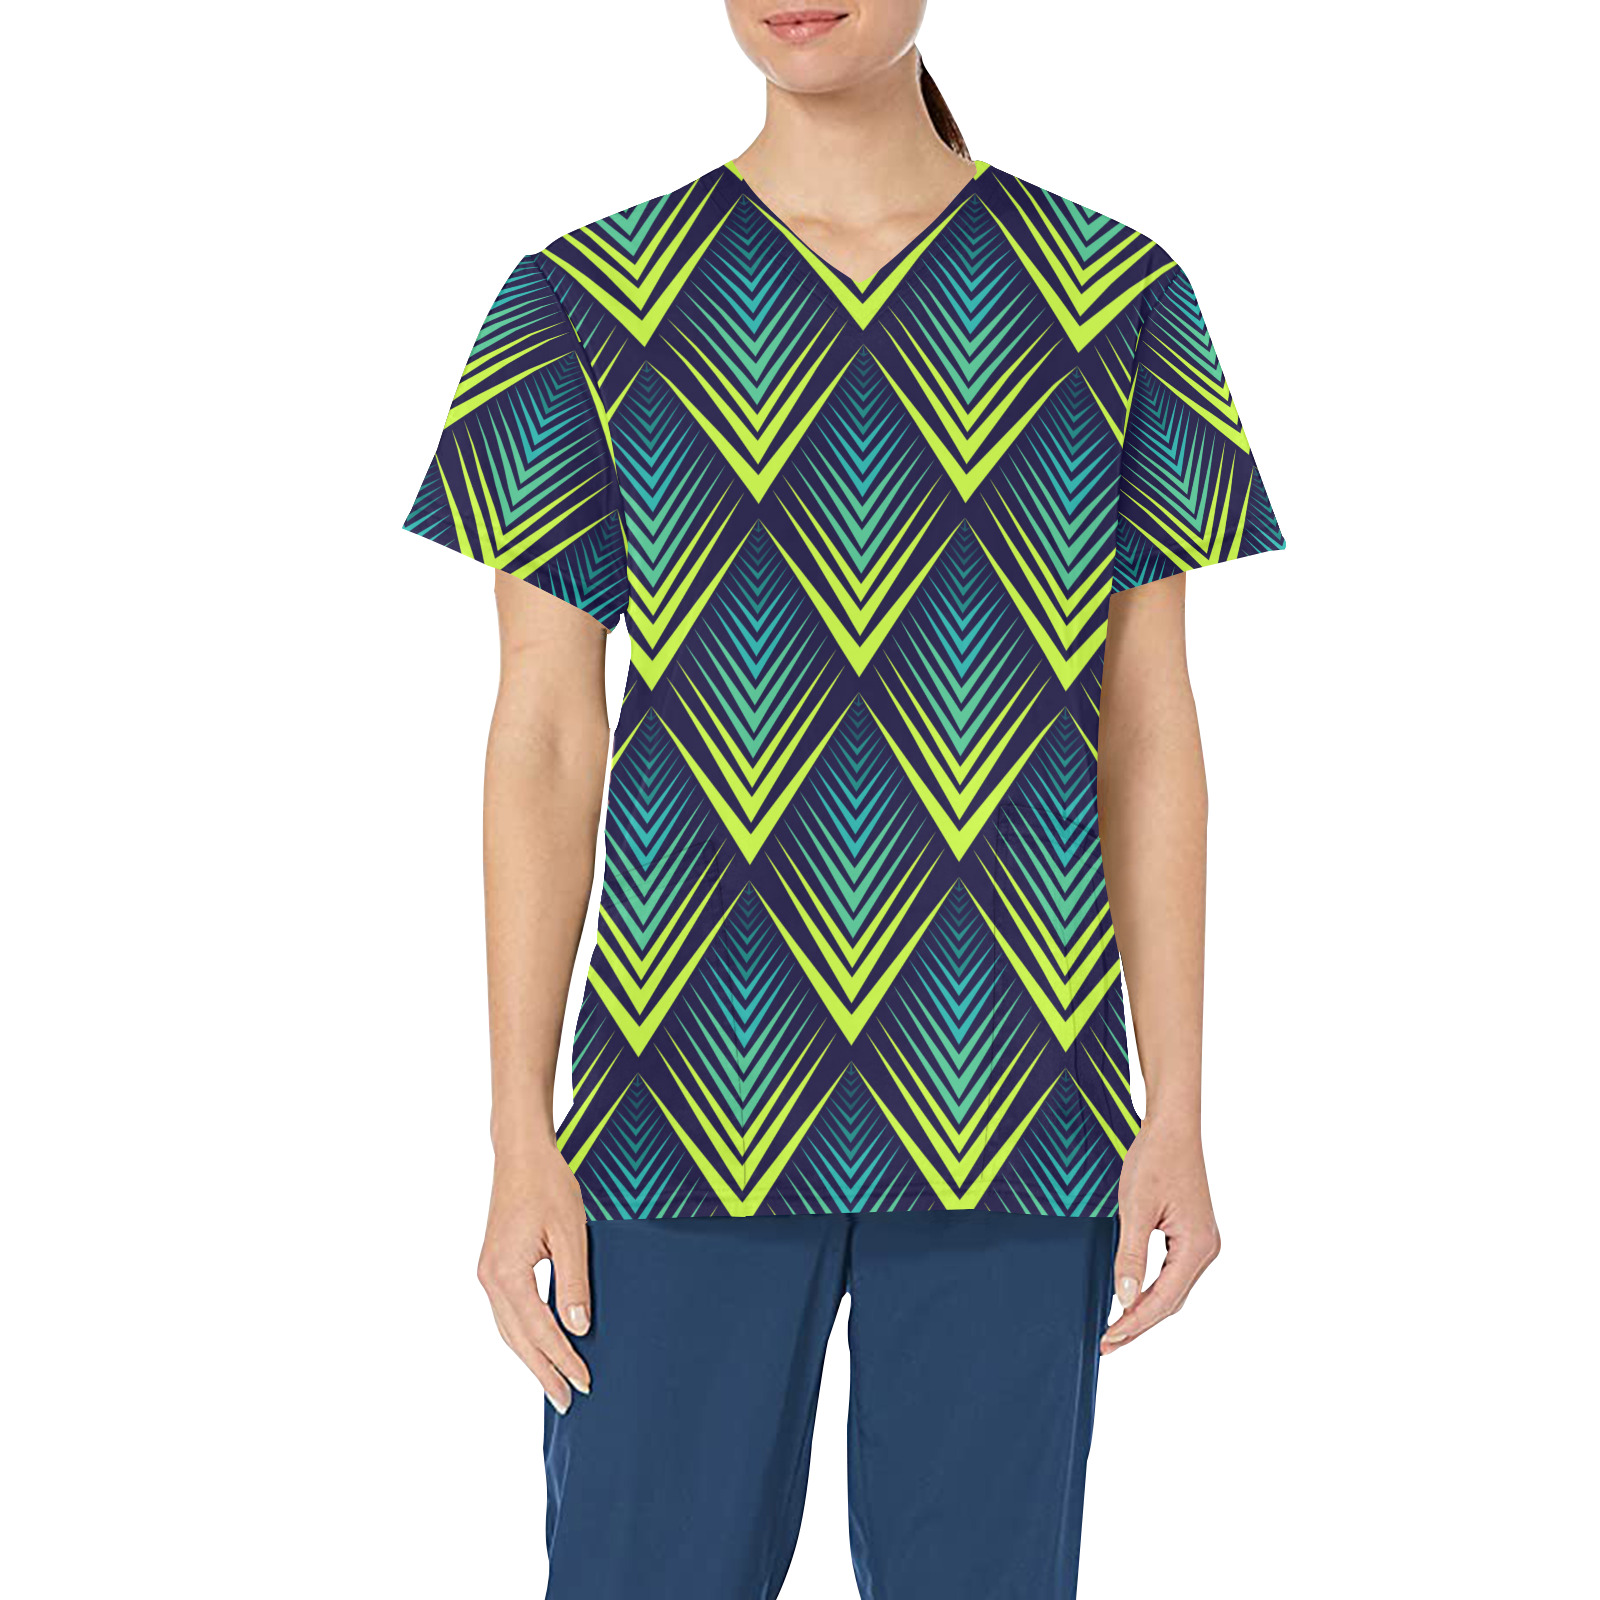 Teal and Yellow Arrows Pattern Children's Ward All Over Print Scrub Top